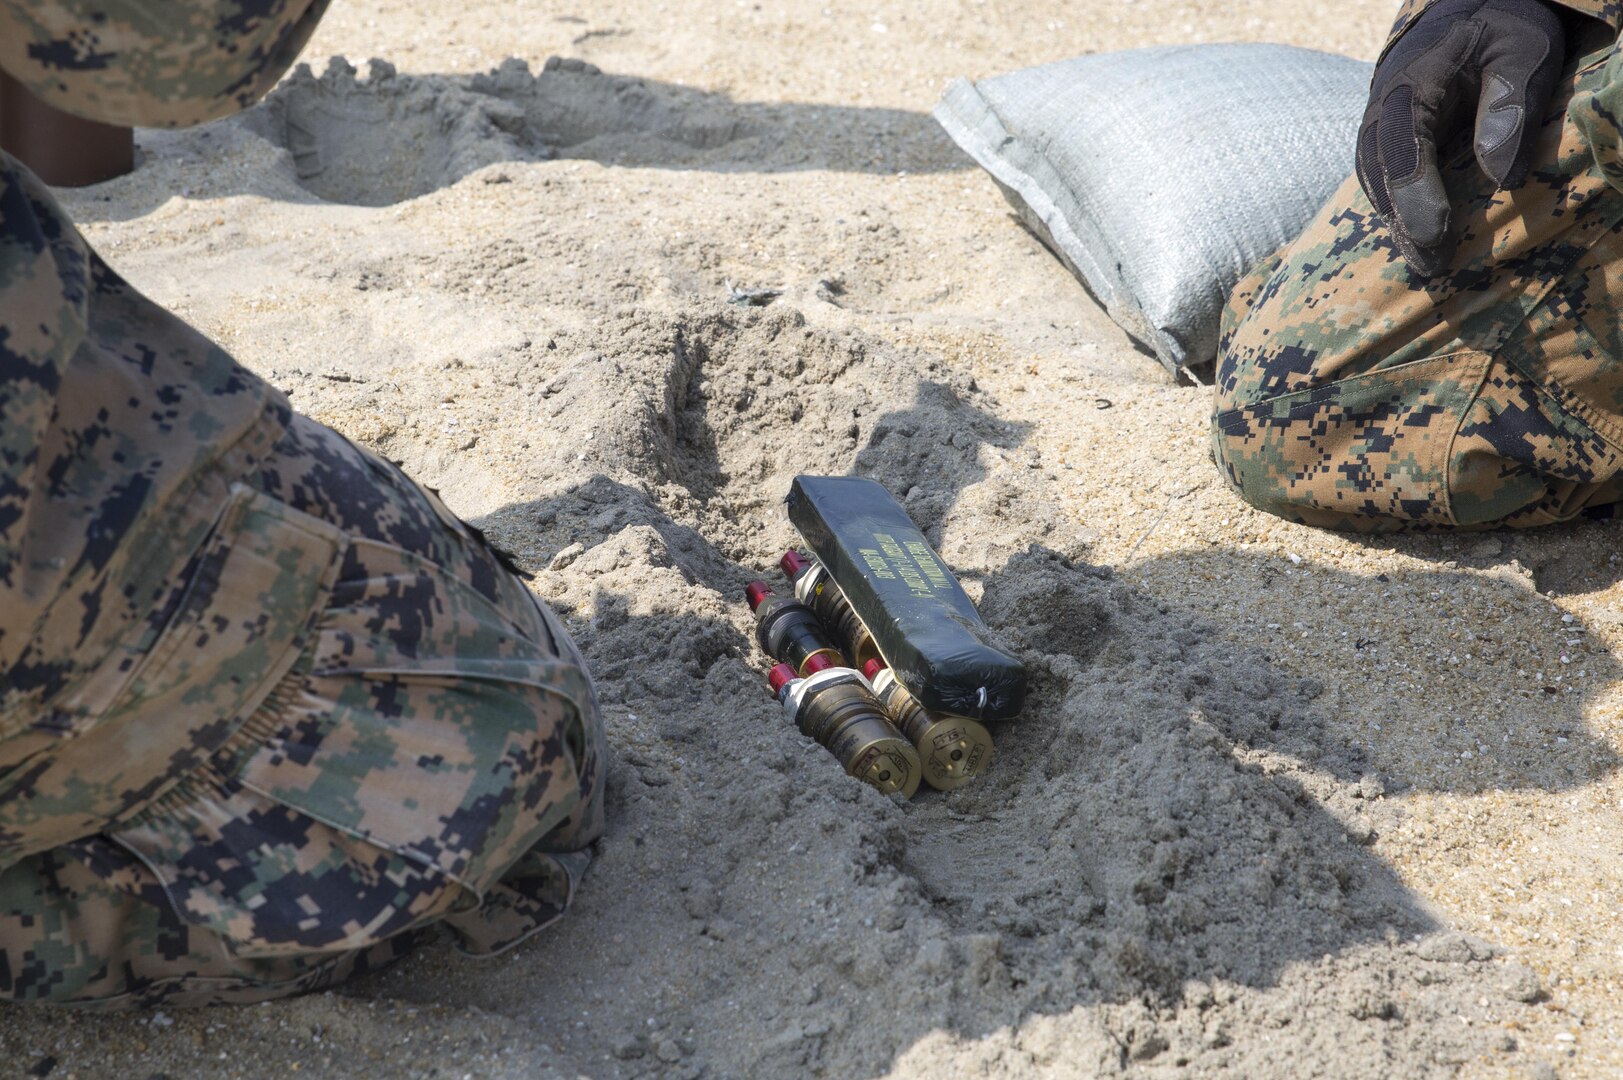 Explosive ordnance disposal Marines with Headquarters and Headquarters Squadron bury explosive devices during an emergency destruct training exercise at Target Island, Marine Corps Air Station Iwakuni, Japan, July 14, 2017. The EOD Marines spent the day burying explosive devices in the sands of the island and remotely detonating them from a bunker. Twenty pounds of composition 4 were used for every set of explosions throughout the exercise. (U.S Marine Corps photo by Lance Cpl. Carlos Jimenez)